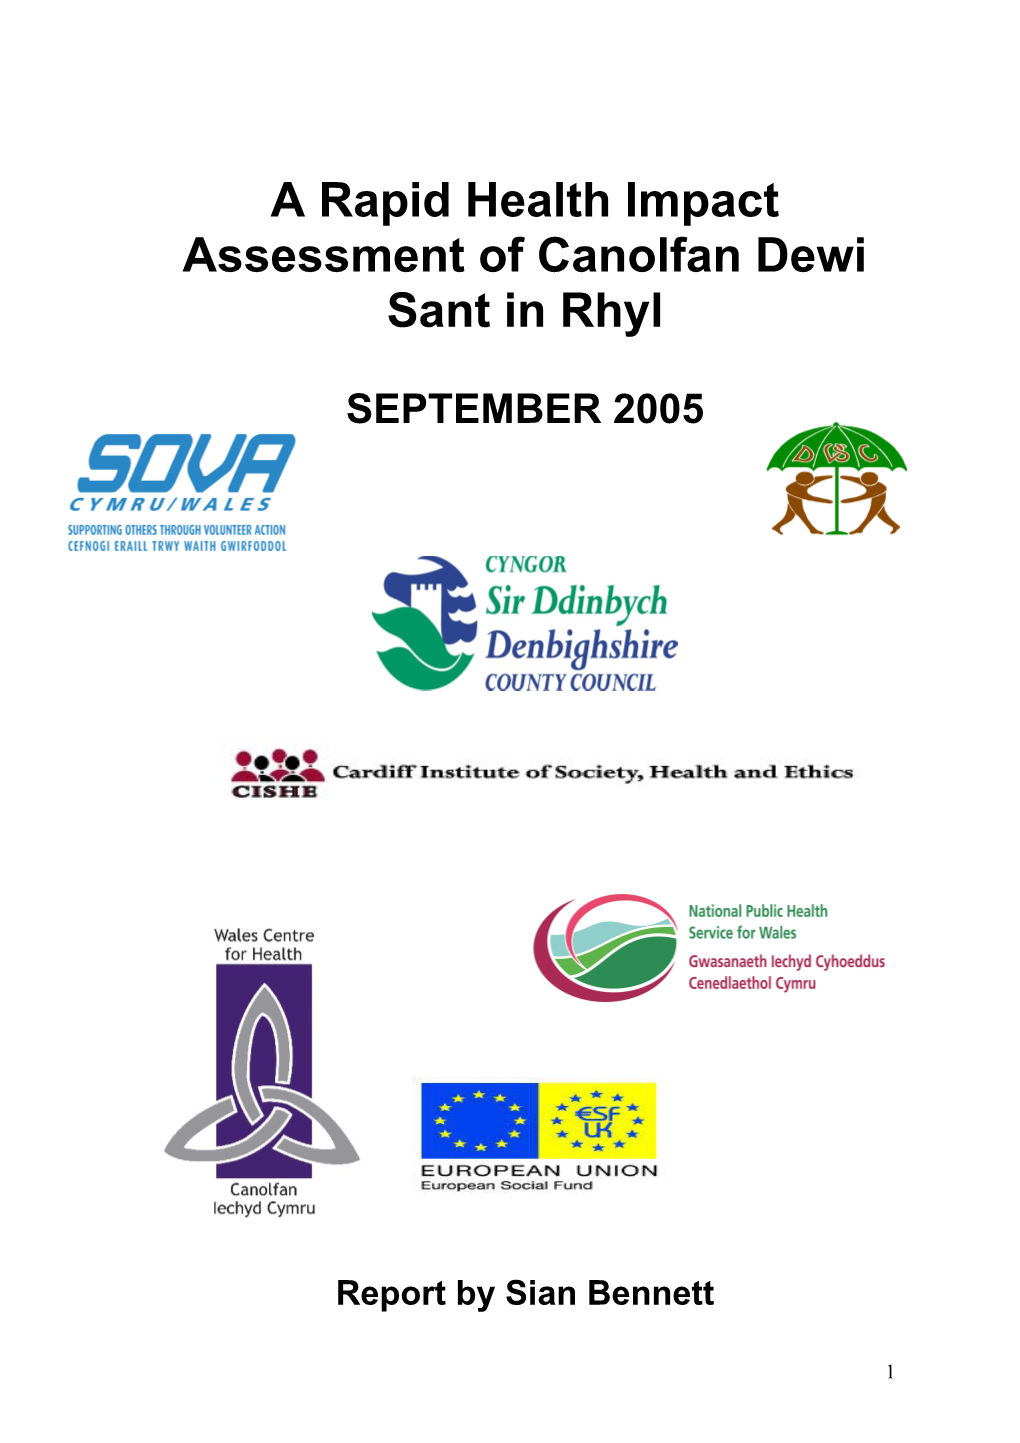 A Rapid Health Impact Assessment of the Dewi Sant Centre in Rhyl